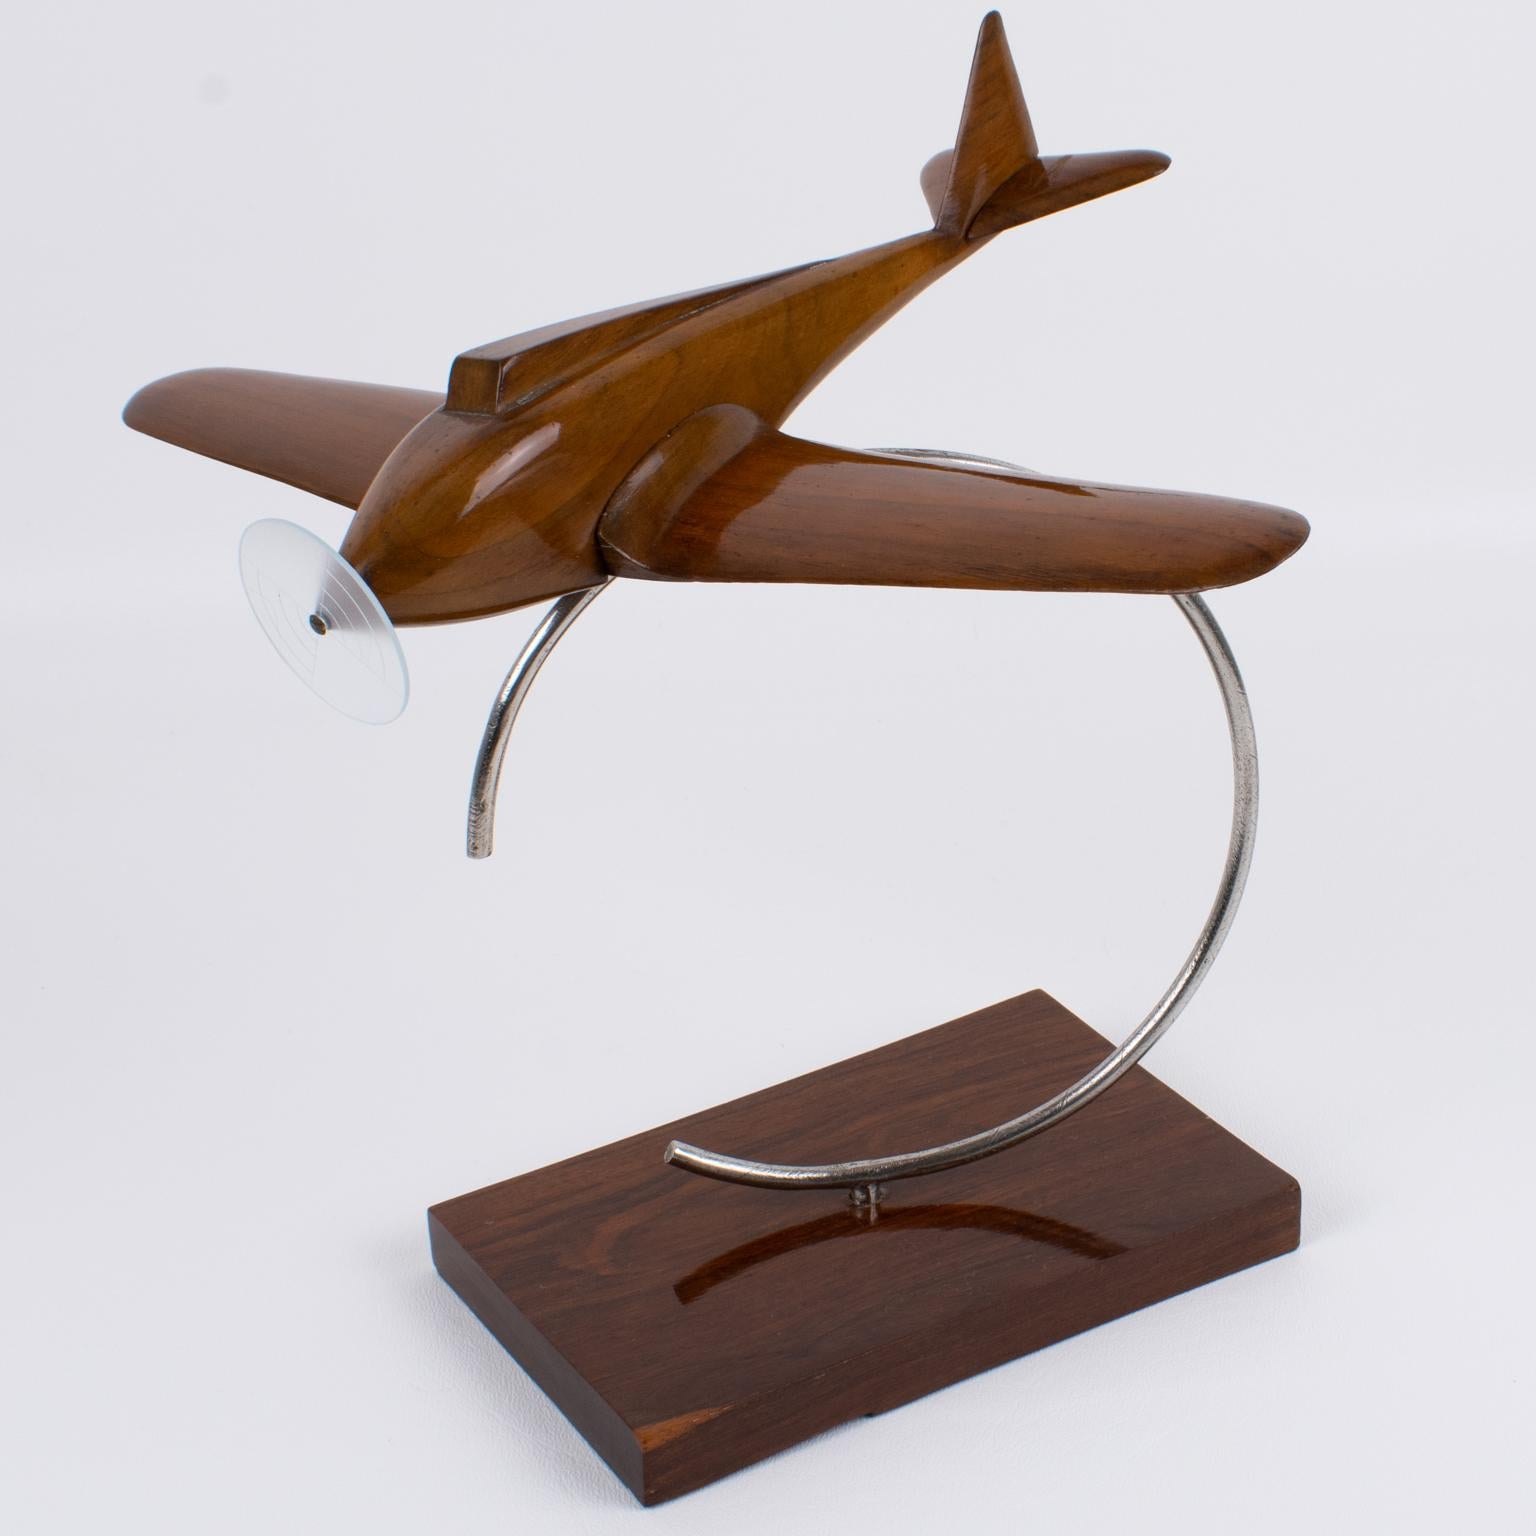 Art Deco Wood and Metal Airplane Aviation Propeller Model, France 1930s For Sale 10